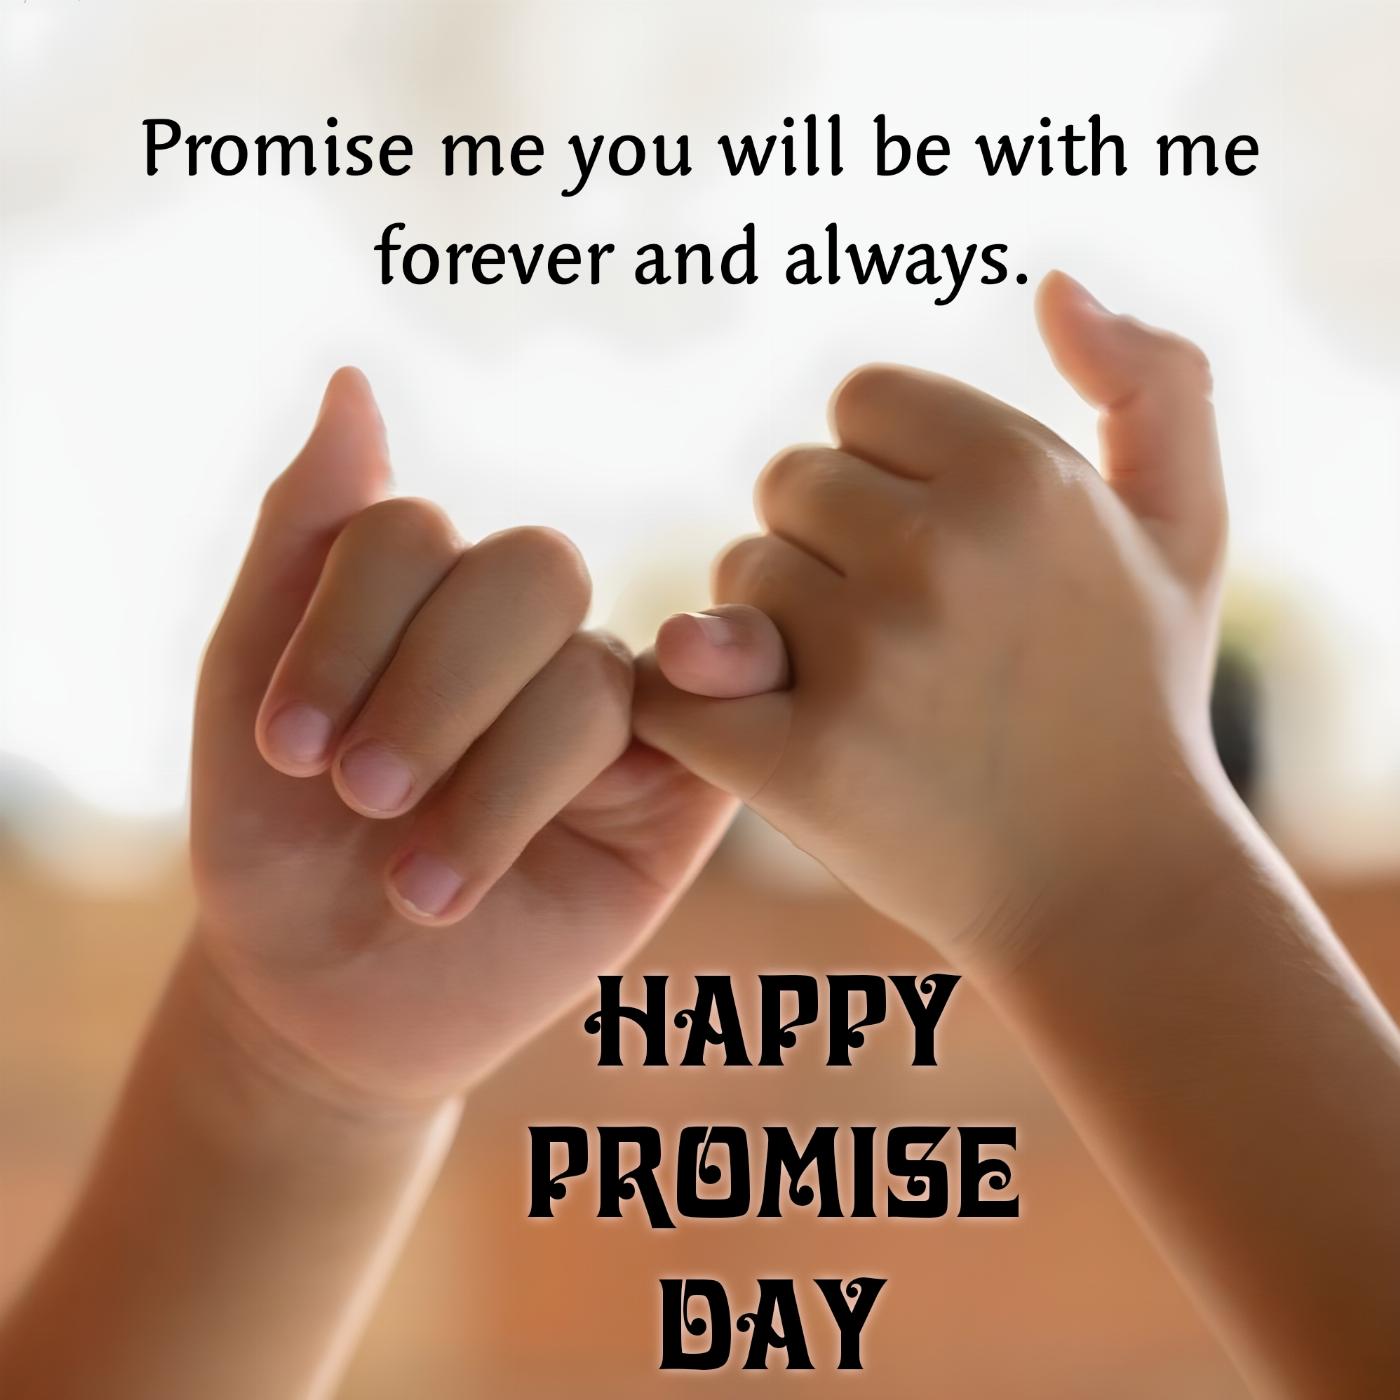 Promise me you will be with me forever and always